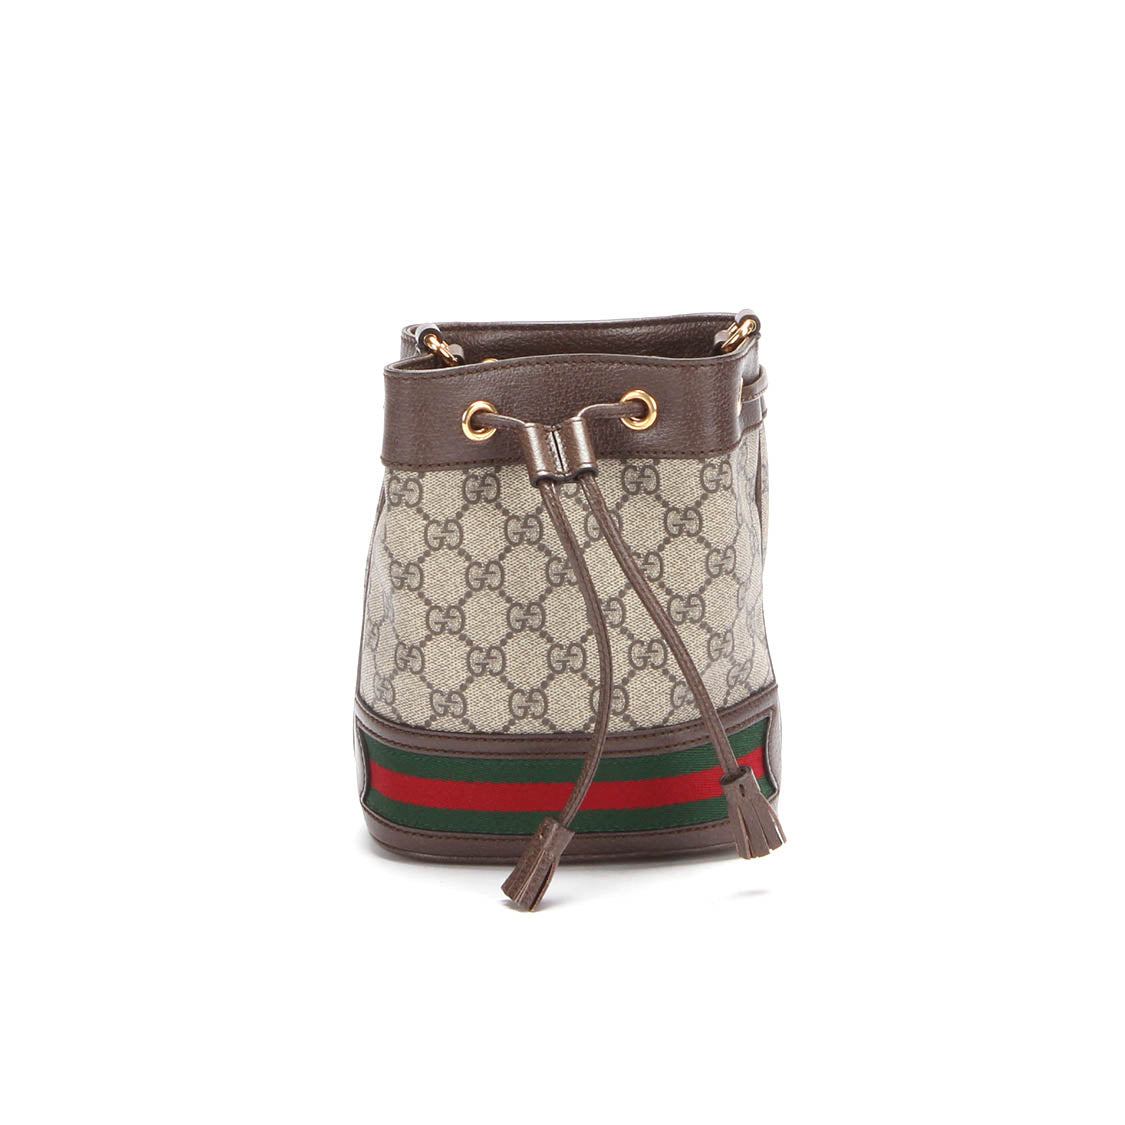 Gucci Mini GG Supreme Ophidia Bucket Bag Canvas Crossbody Bag 550620 in Excellent condition